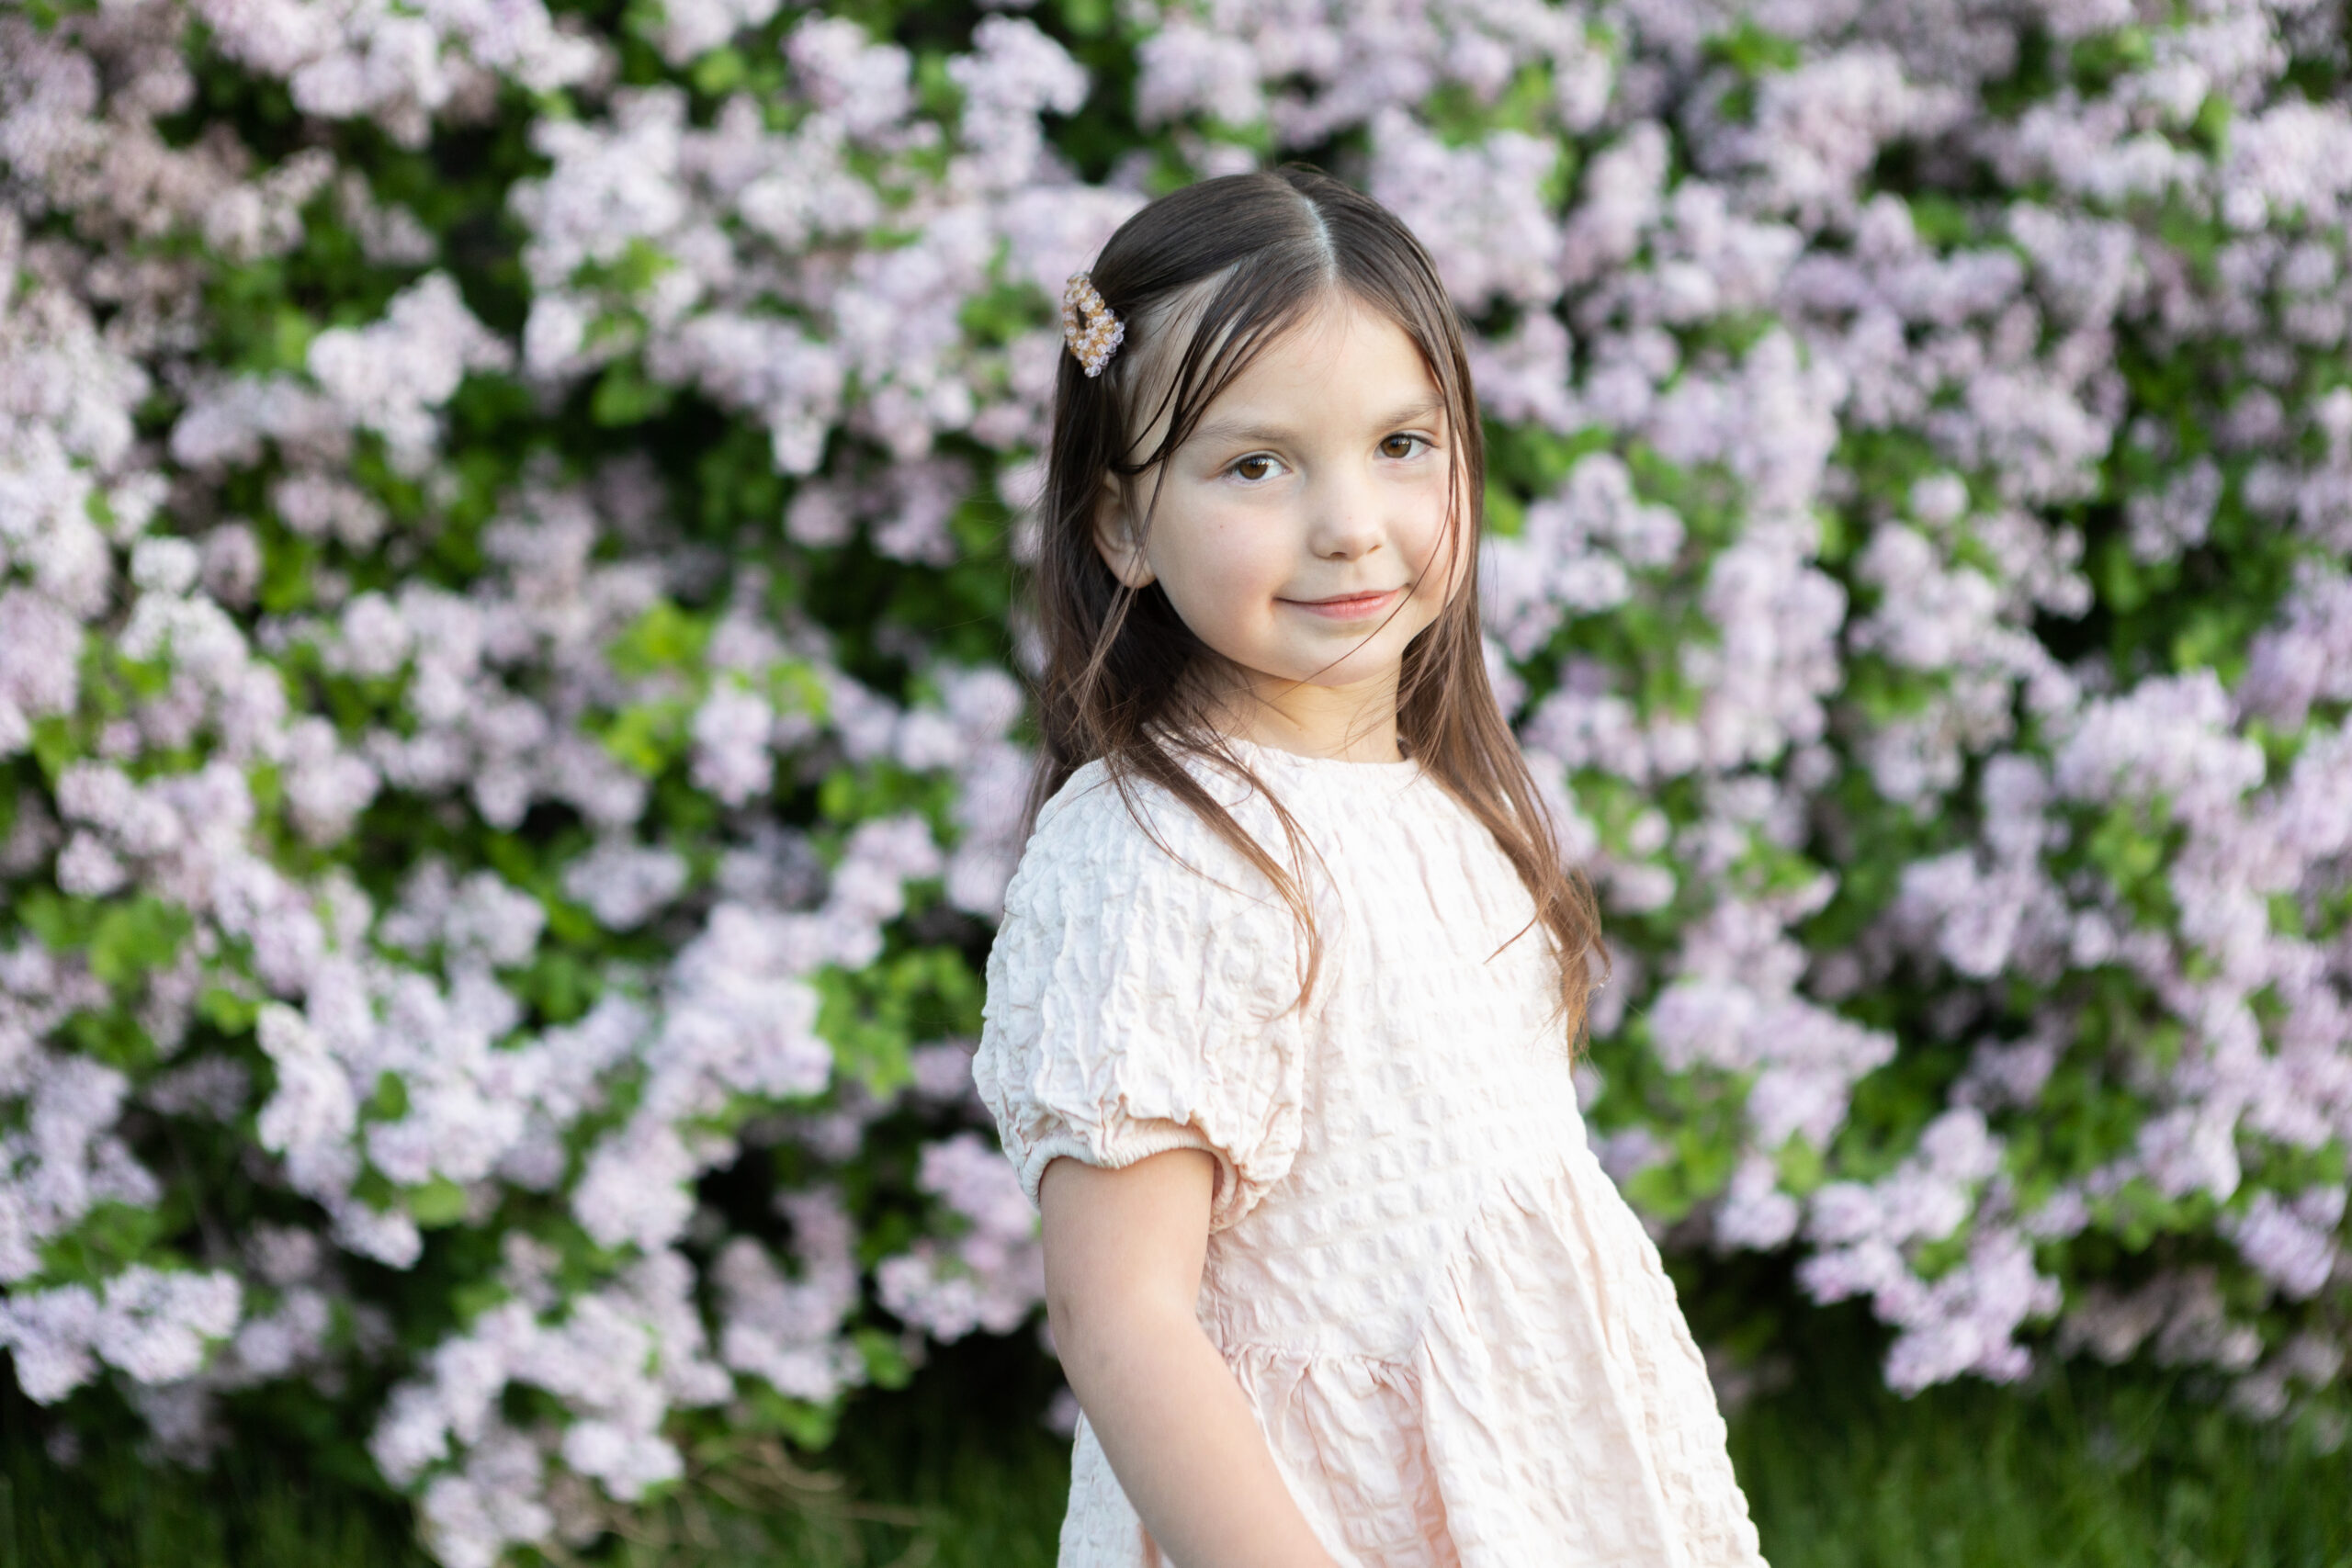 Portrait photo at a lavender wall in West Jordan